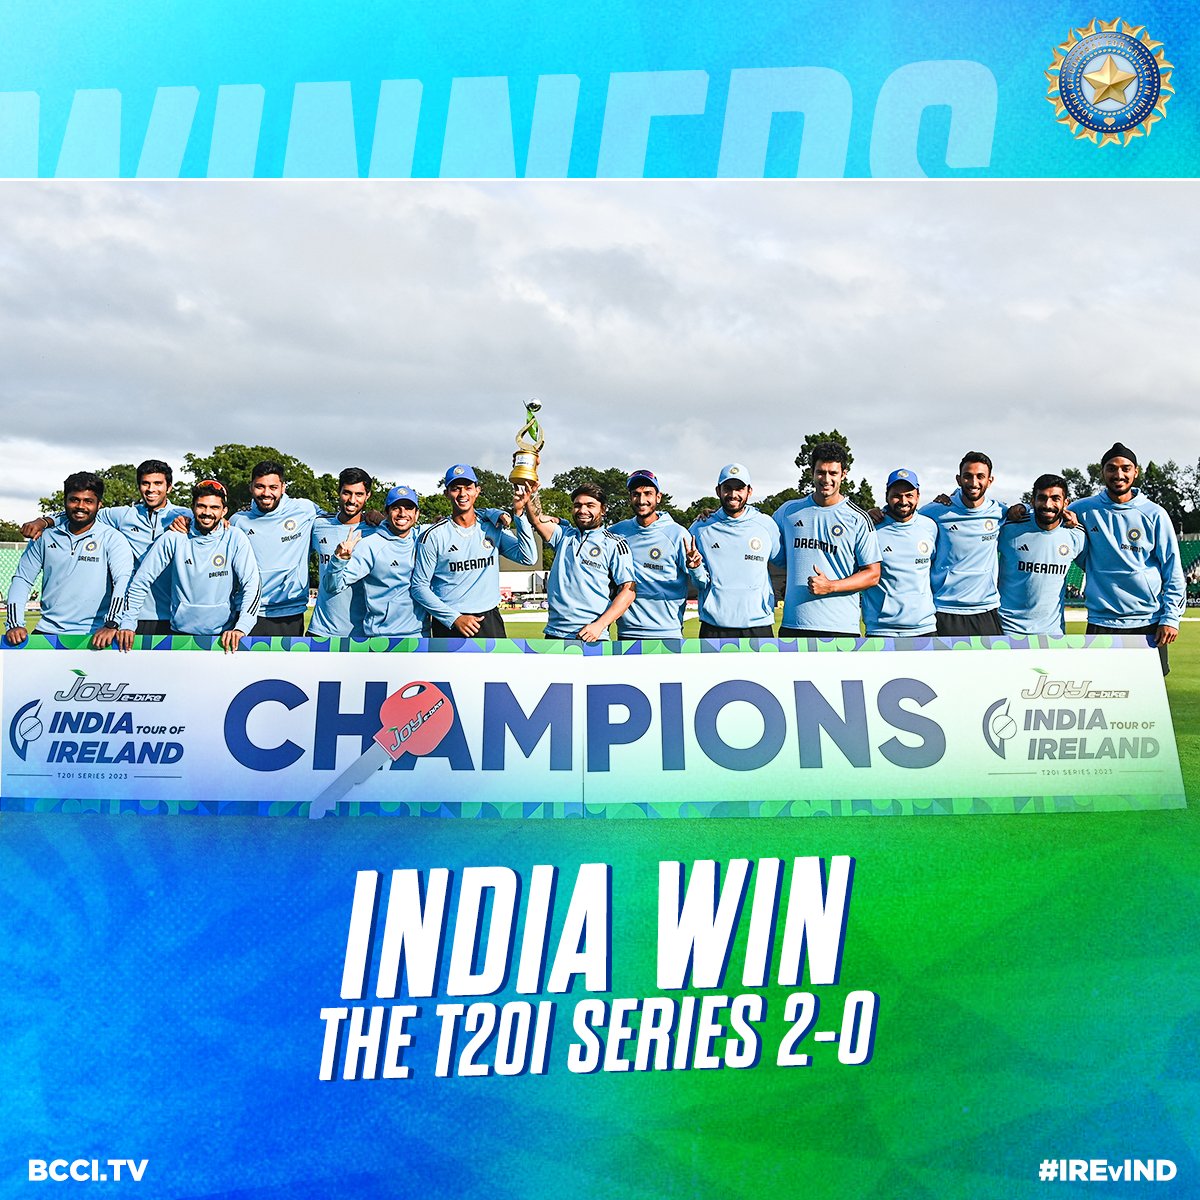 All smiles here in Dublin as #TeamIndia complete a 2-0 T20I series win 😃🙌

#IREvIND